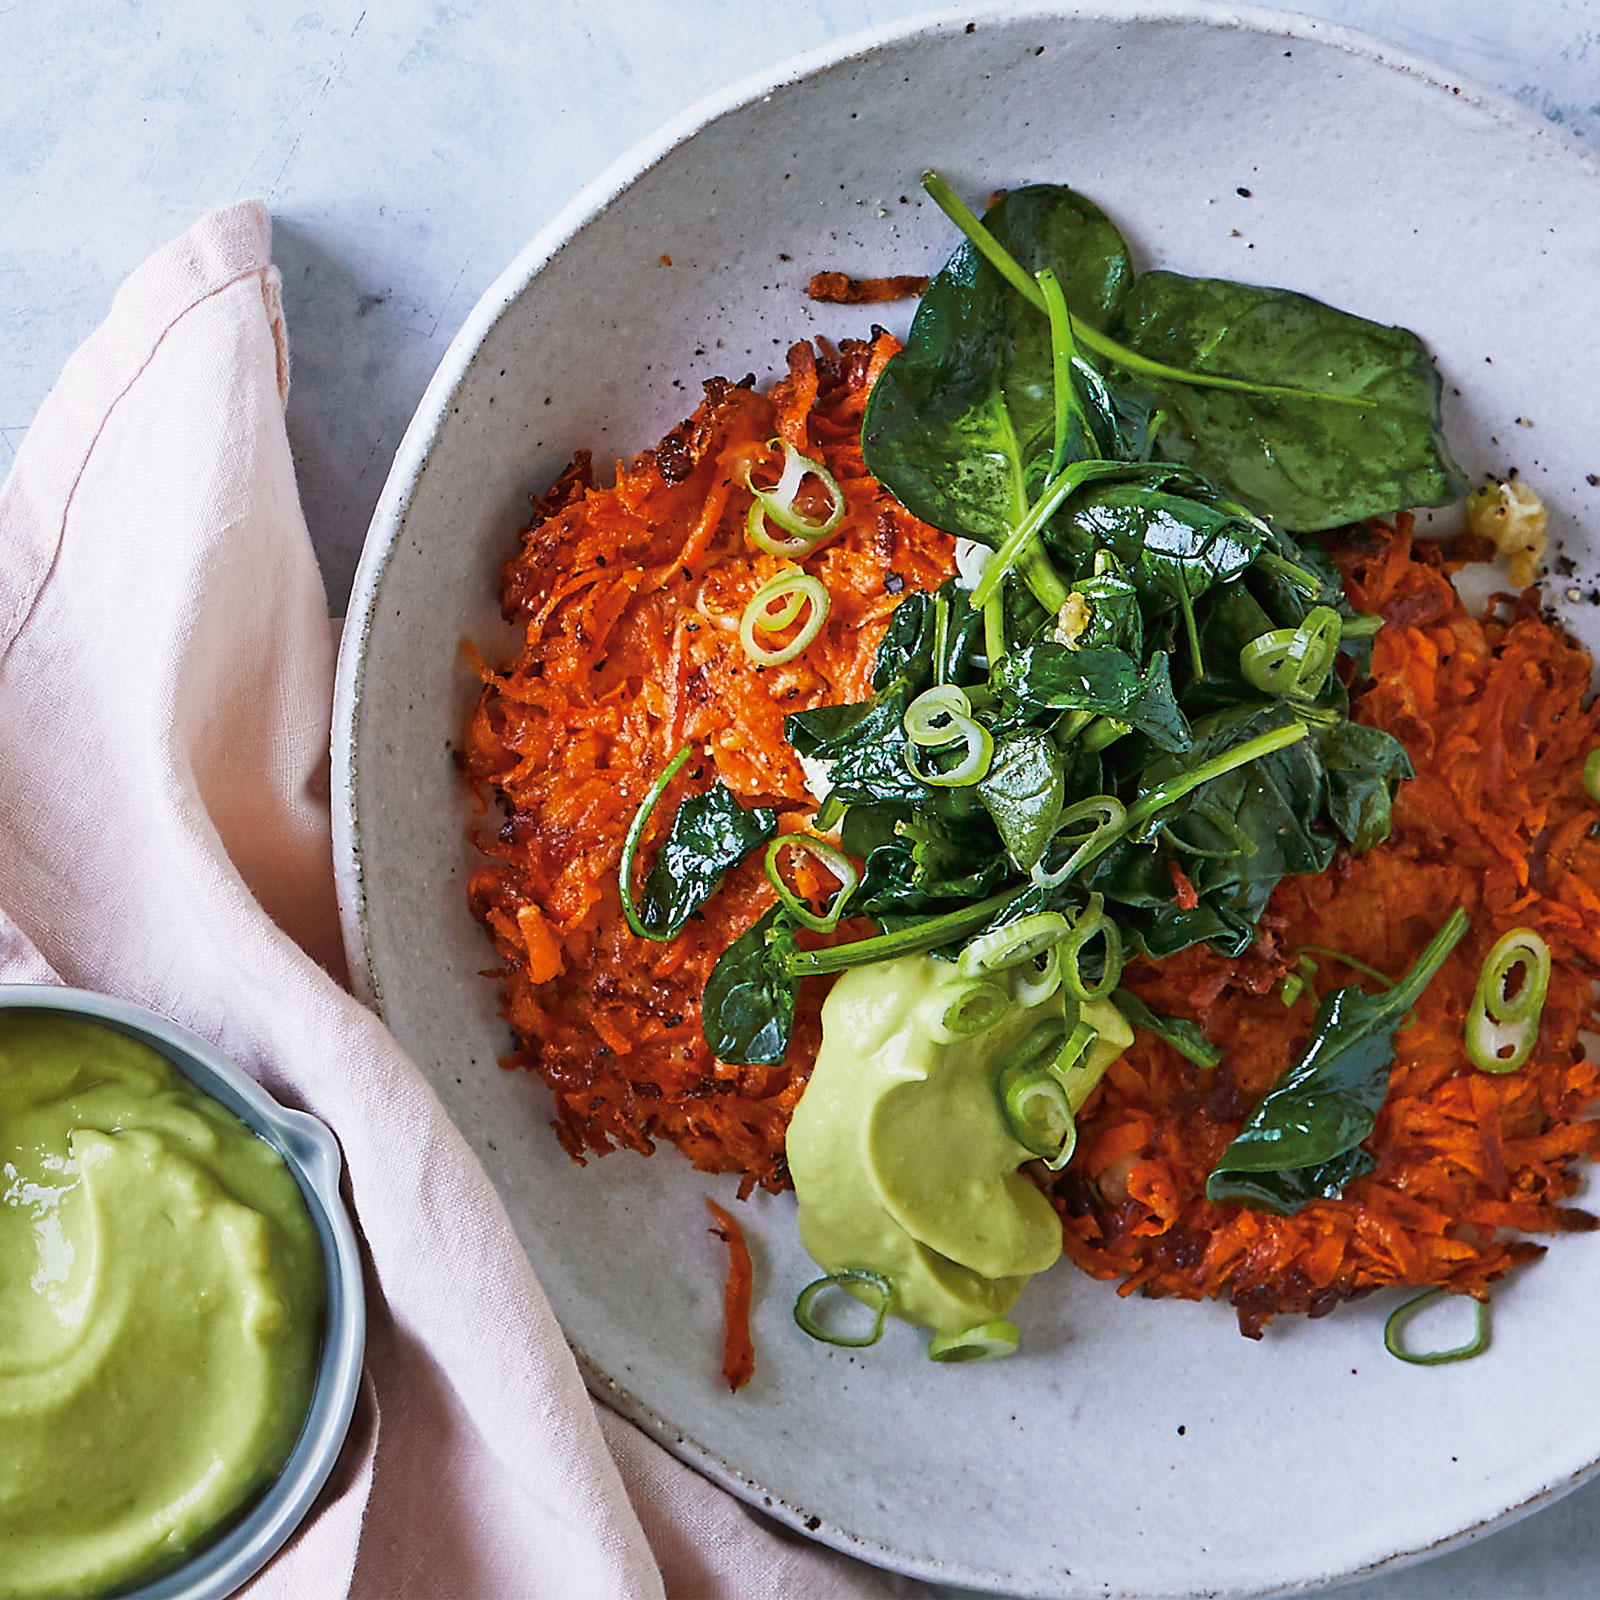 Sweet Potato and Halloumi Fritters arranged in a bowl. Topped with sliced spring onion, sauted spinach and a dollop of pureed avocado.